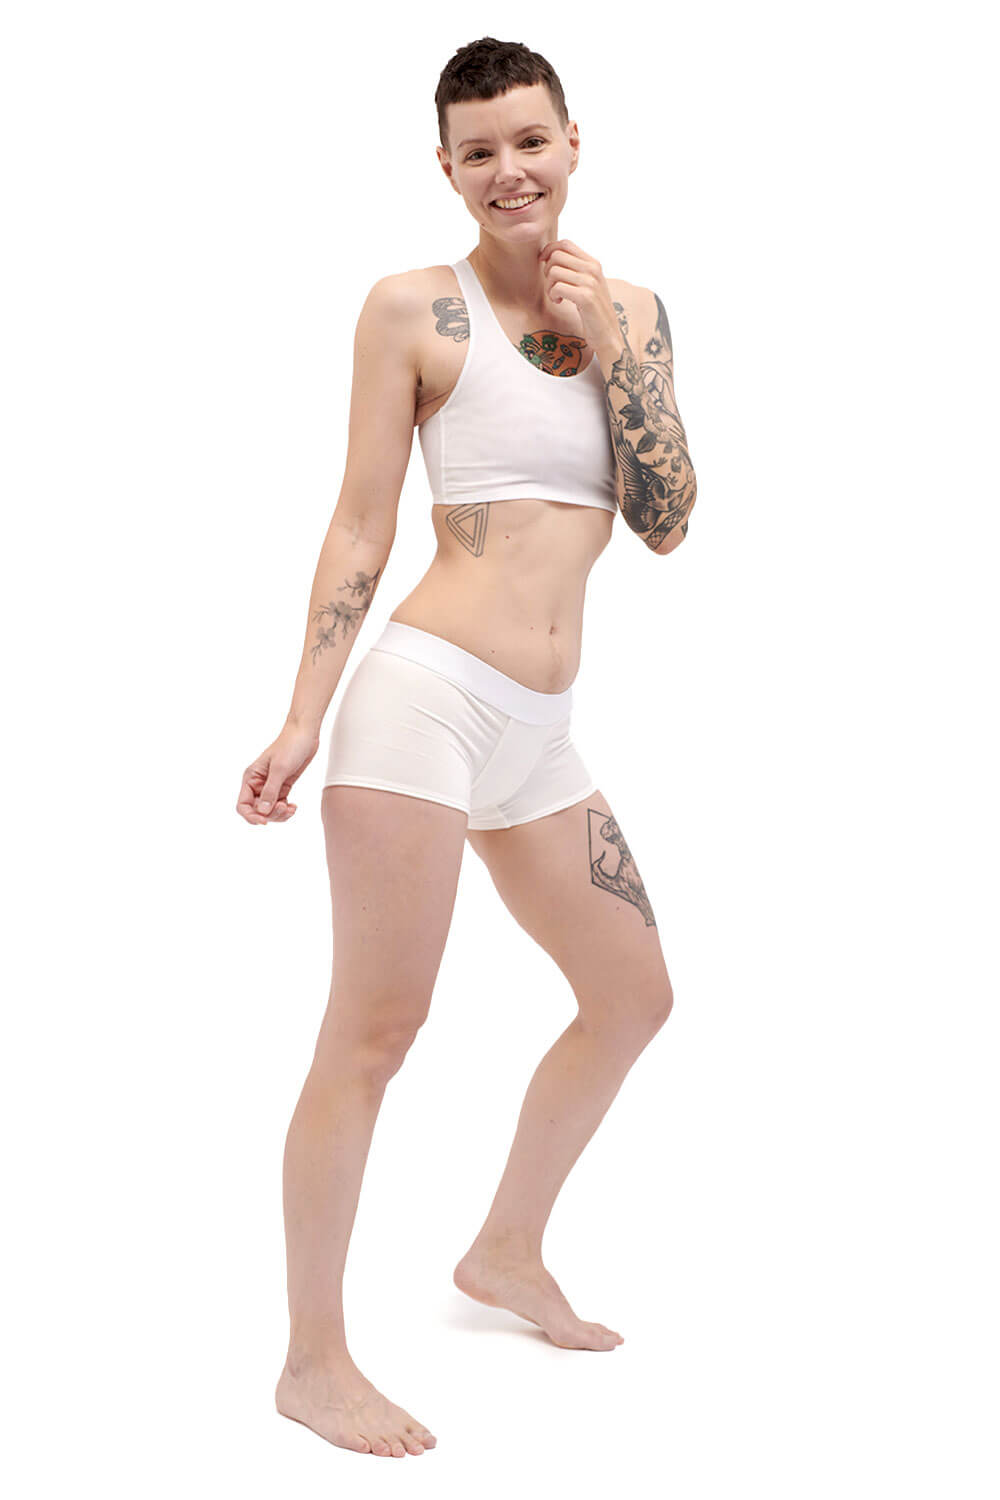 Petite person wearing a white racerback side-open chest binder made from breathable mesh, photographed from the side.